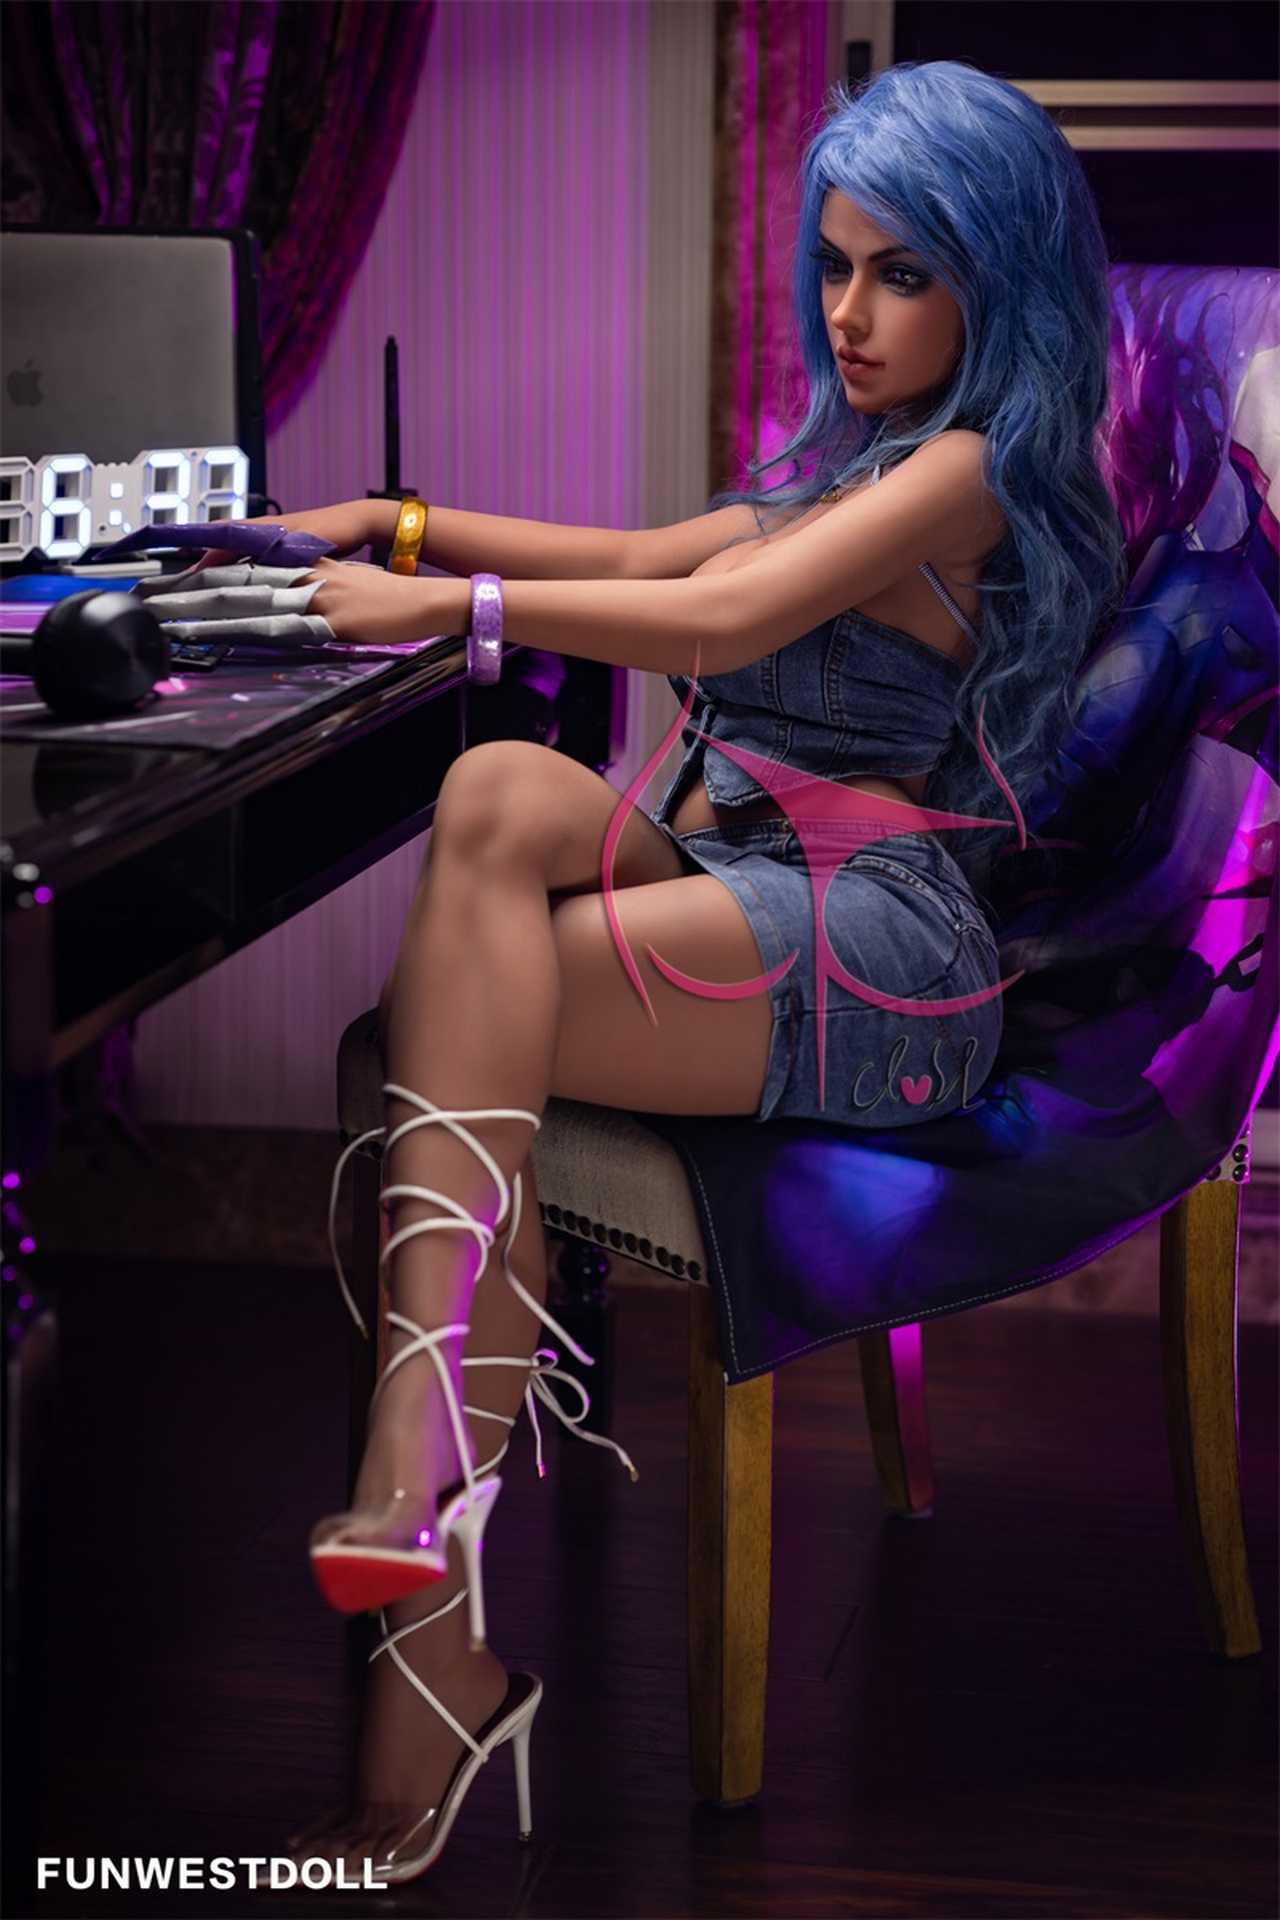 Seductive Funwest Sex Doll: Meet Haylee, the 155cm Blue-Haired Anime Beauty